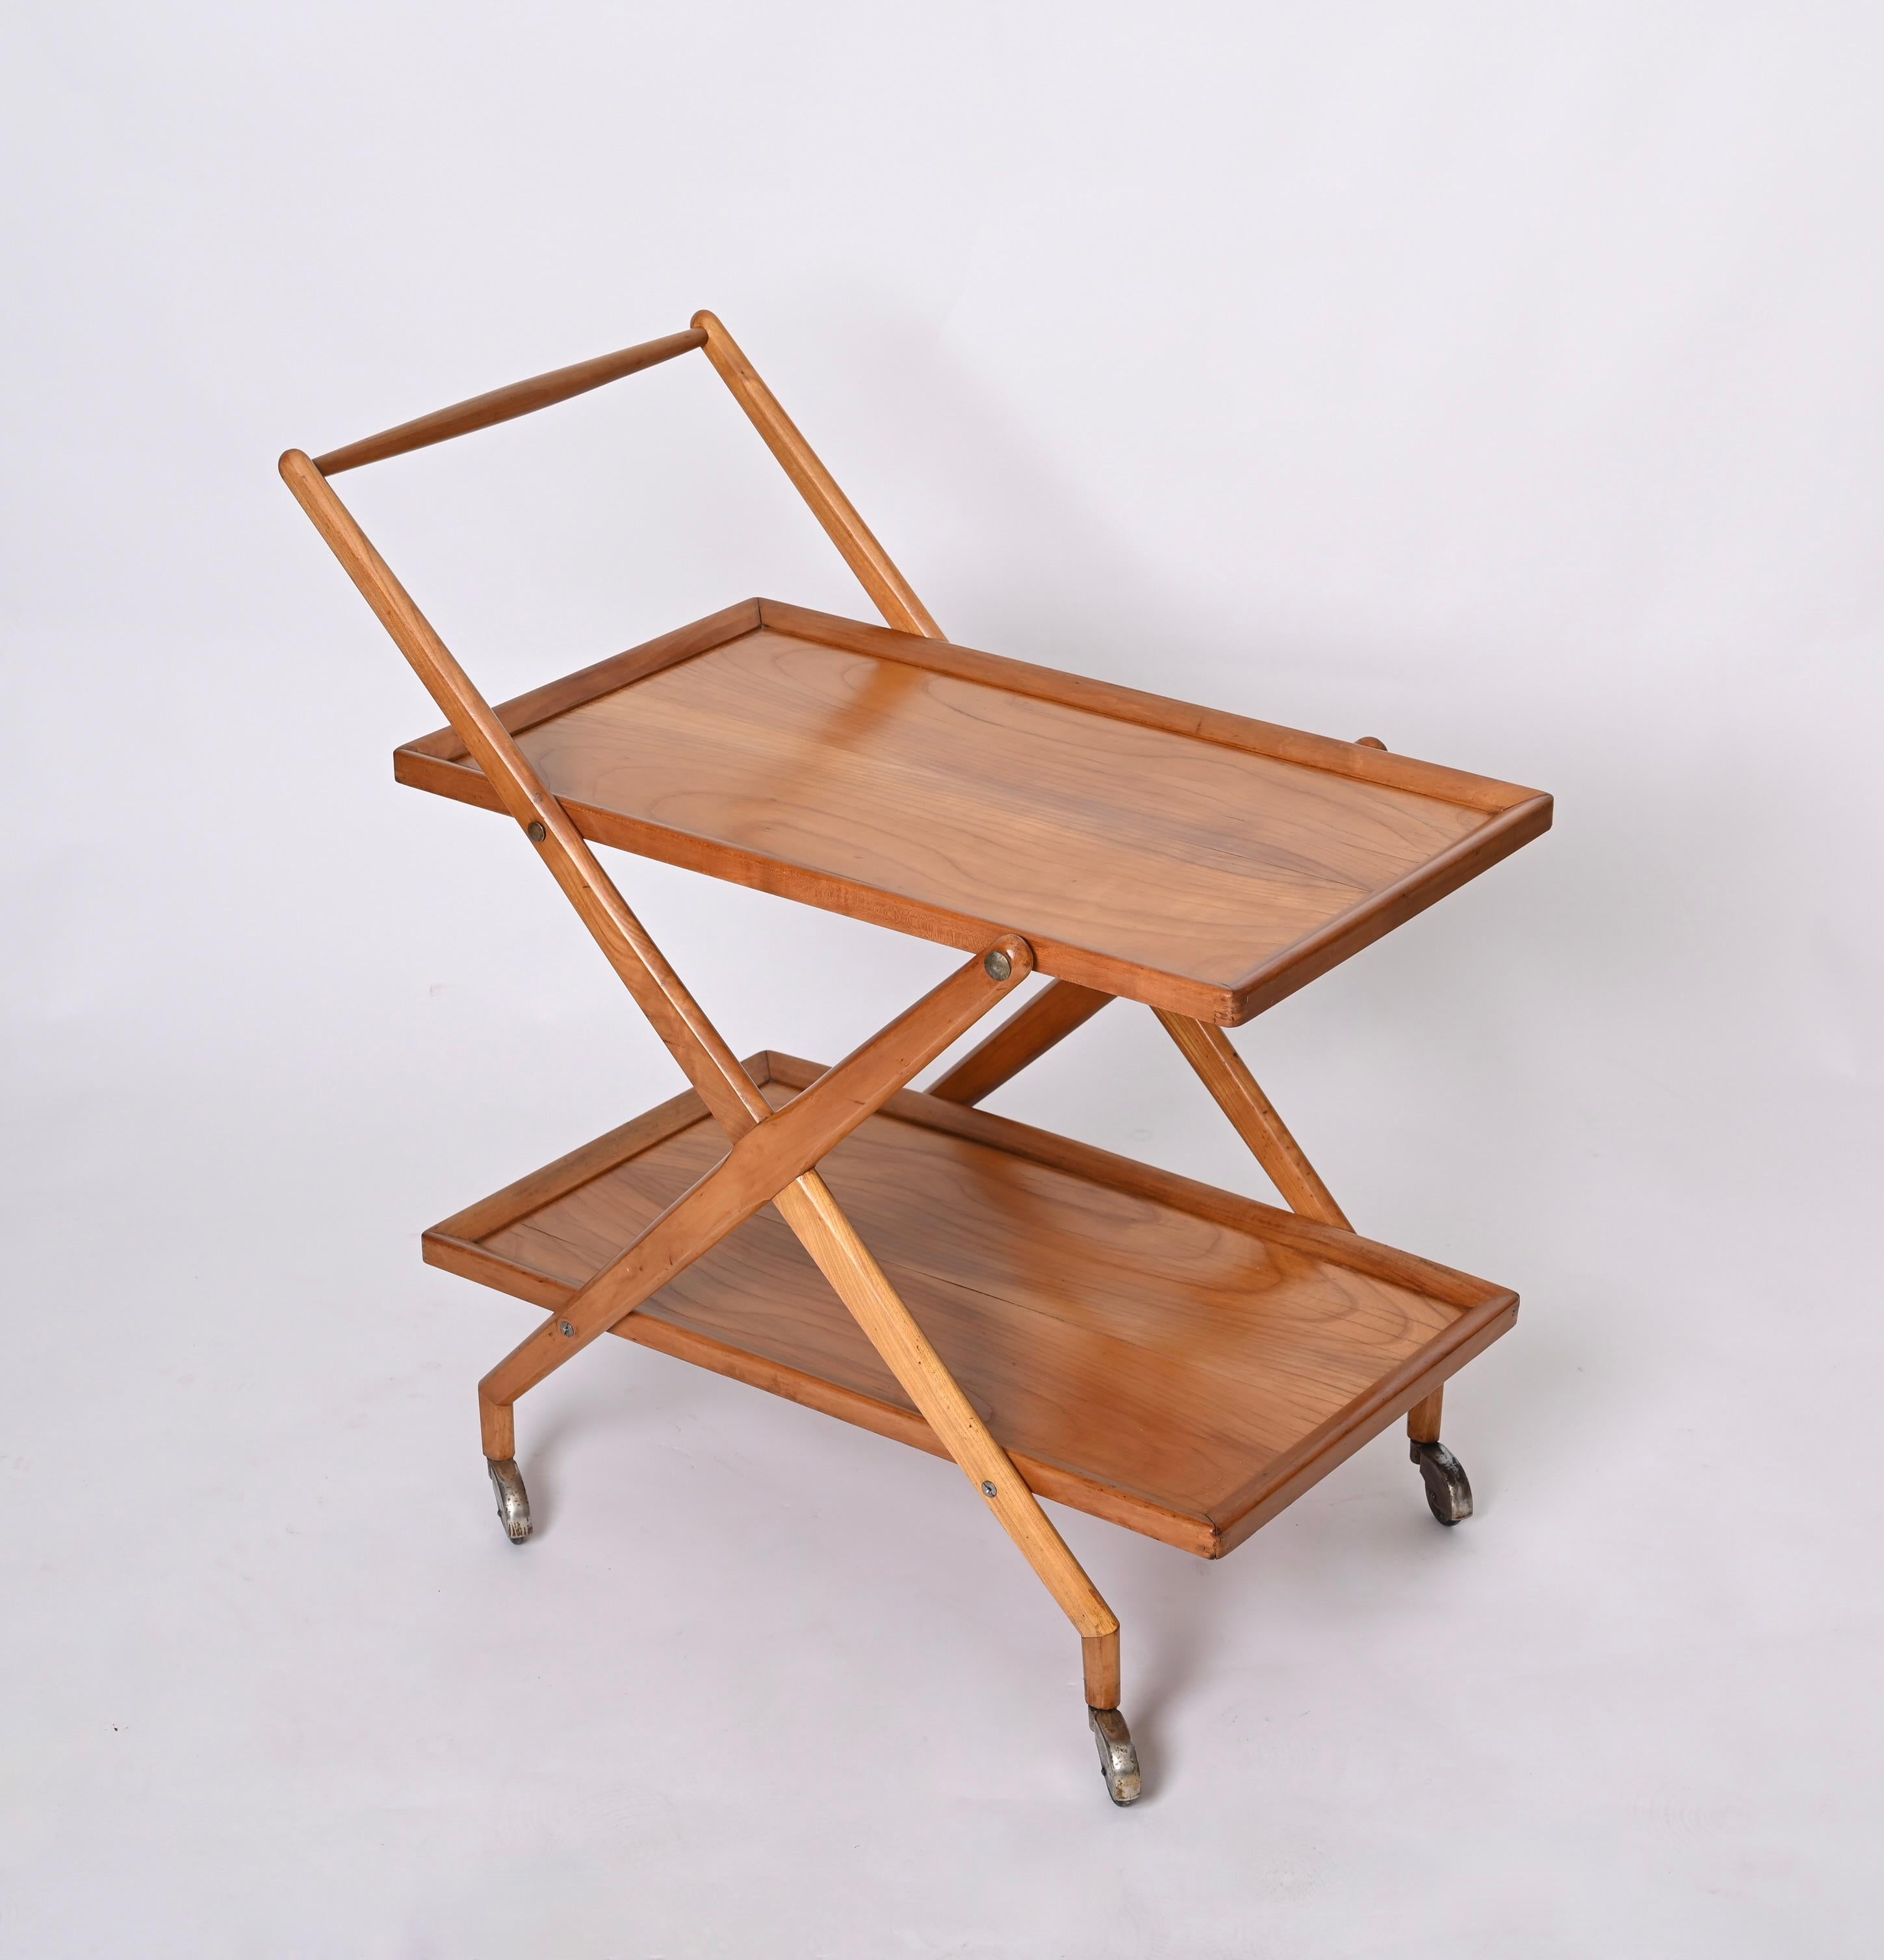 Fantastic midcentury Italian serving bar cart in cherry wood, with metal finishes. This cart was designed in Italy by Cesare Lacca during the 1950s.

This elegant piece has two shelves, fully made in solid cherry wood with stunning wood grains.